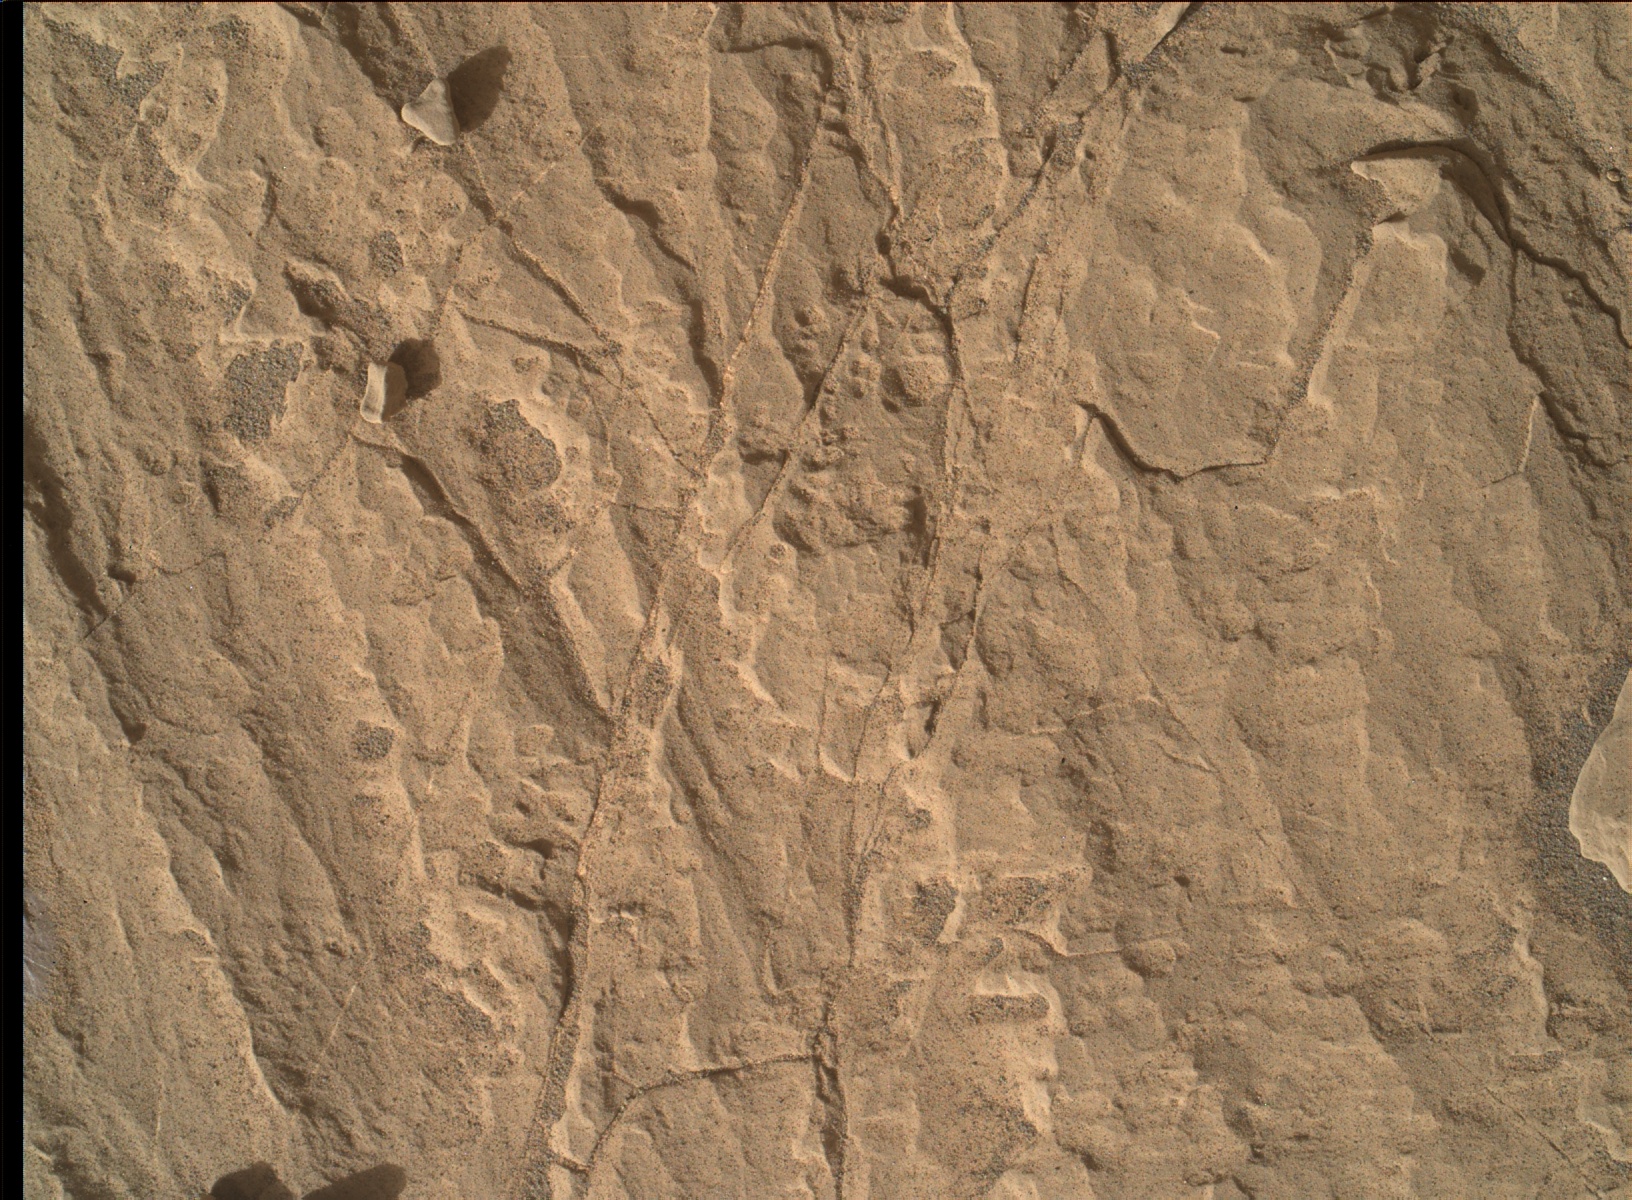 Nasa's Mars rover Curiosity acquired this image using its Mars Hand Lens Imager (MAHLI) on Sol 1845